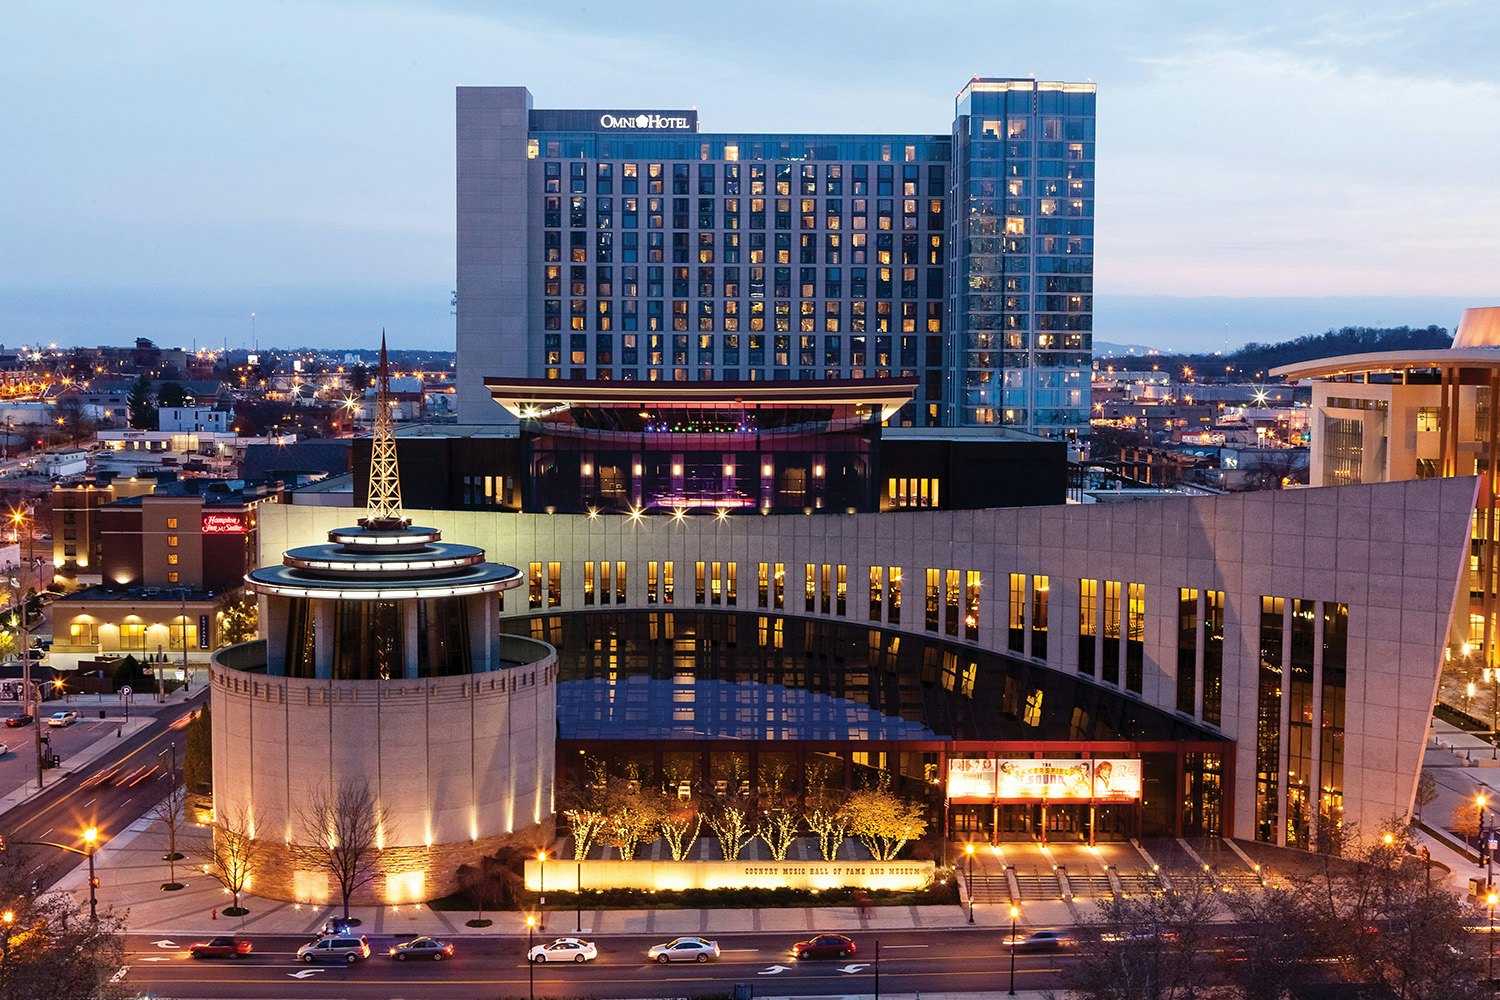 Exterior, night photo of the Country Music Hall of Fame and Museum with the Omni Hotel in the background.